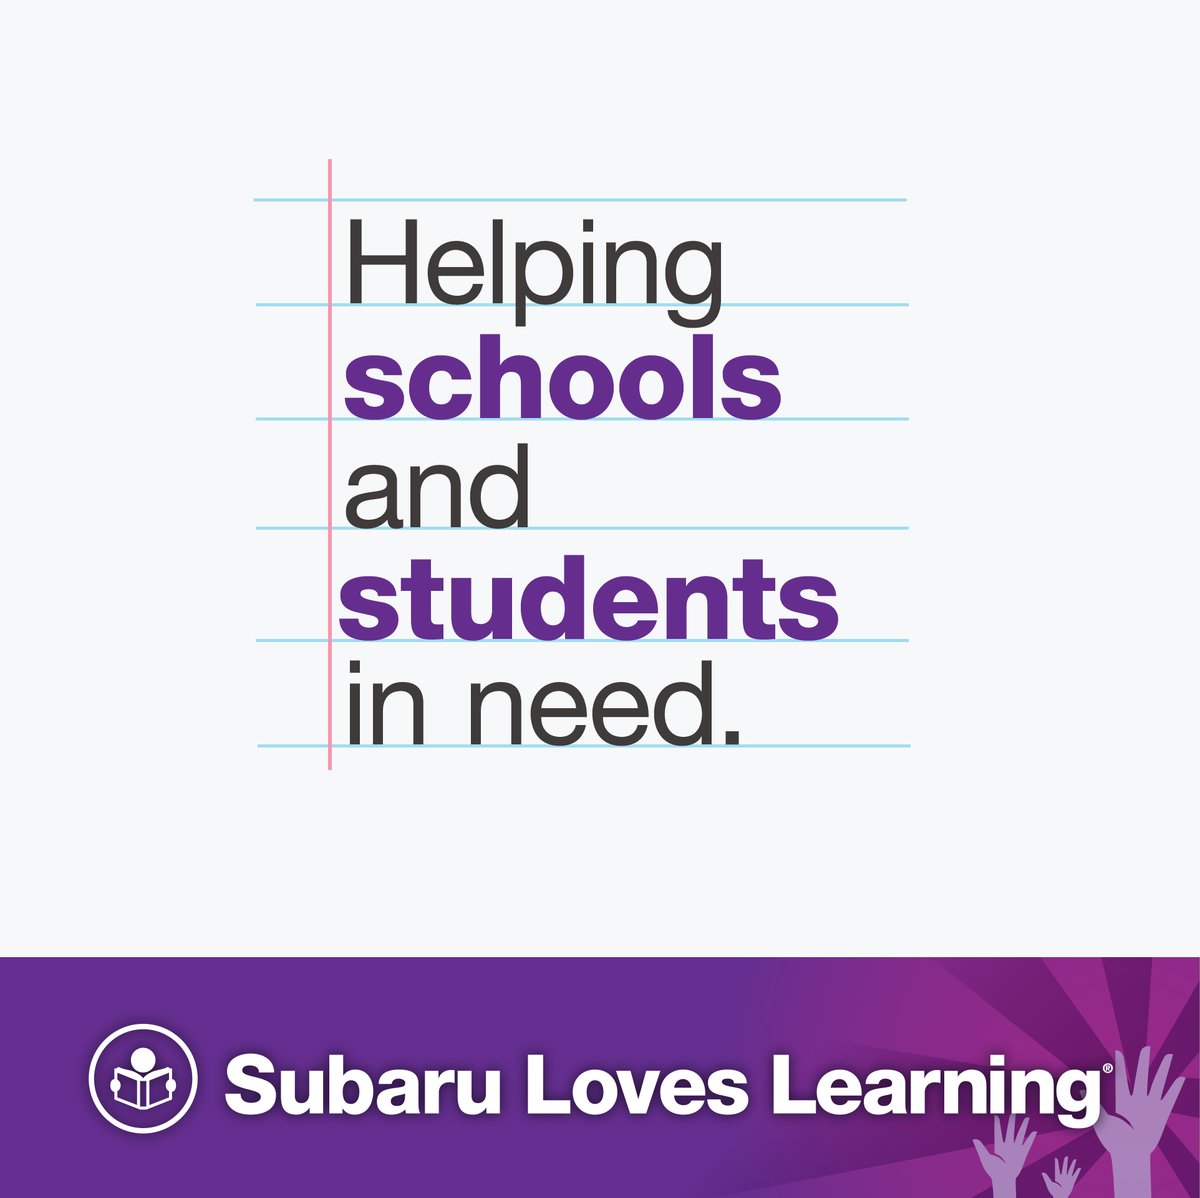 During the month of August, we are joining Subaru and partnering with @AdoptClassroom by providing supplies teachers need at Chiawana High School (@PascoSD1)!  #SubaruLovesLearning

Learn more: bit.ly/3DGdCd6